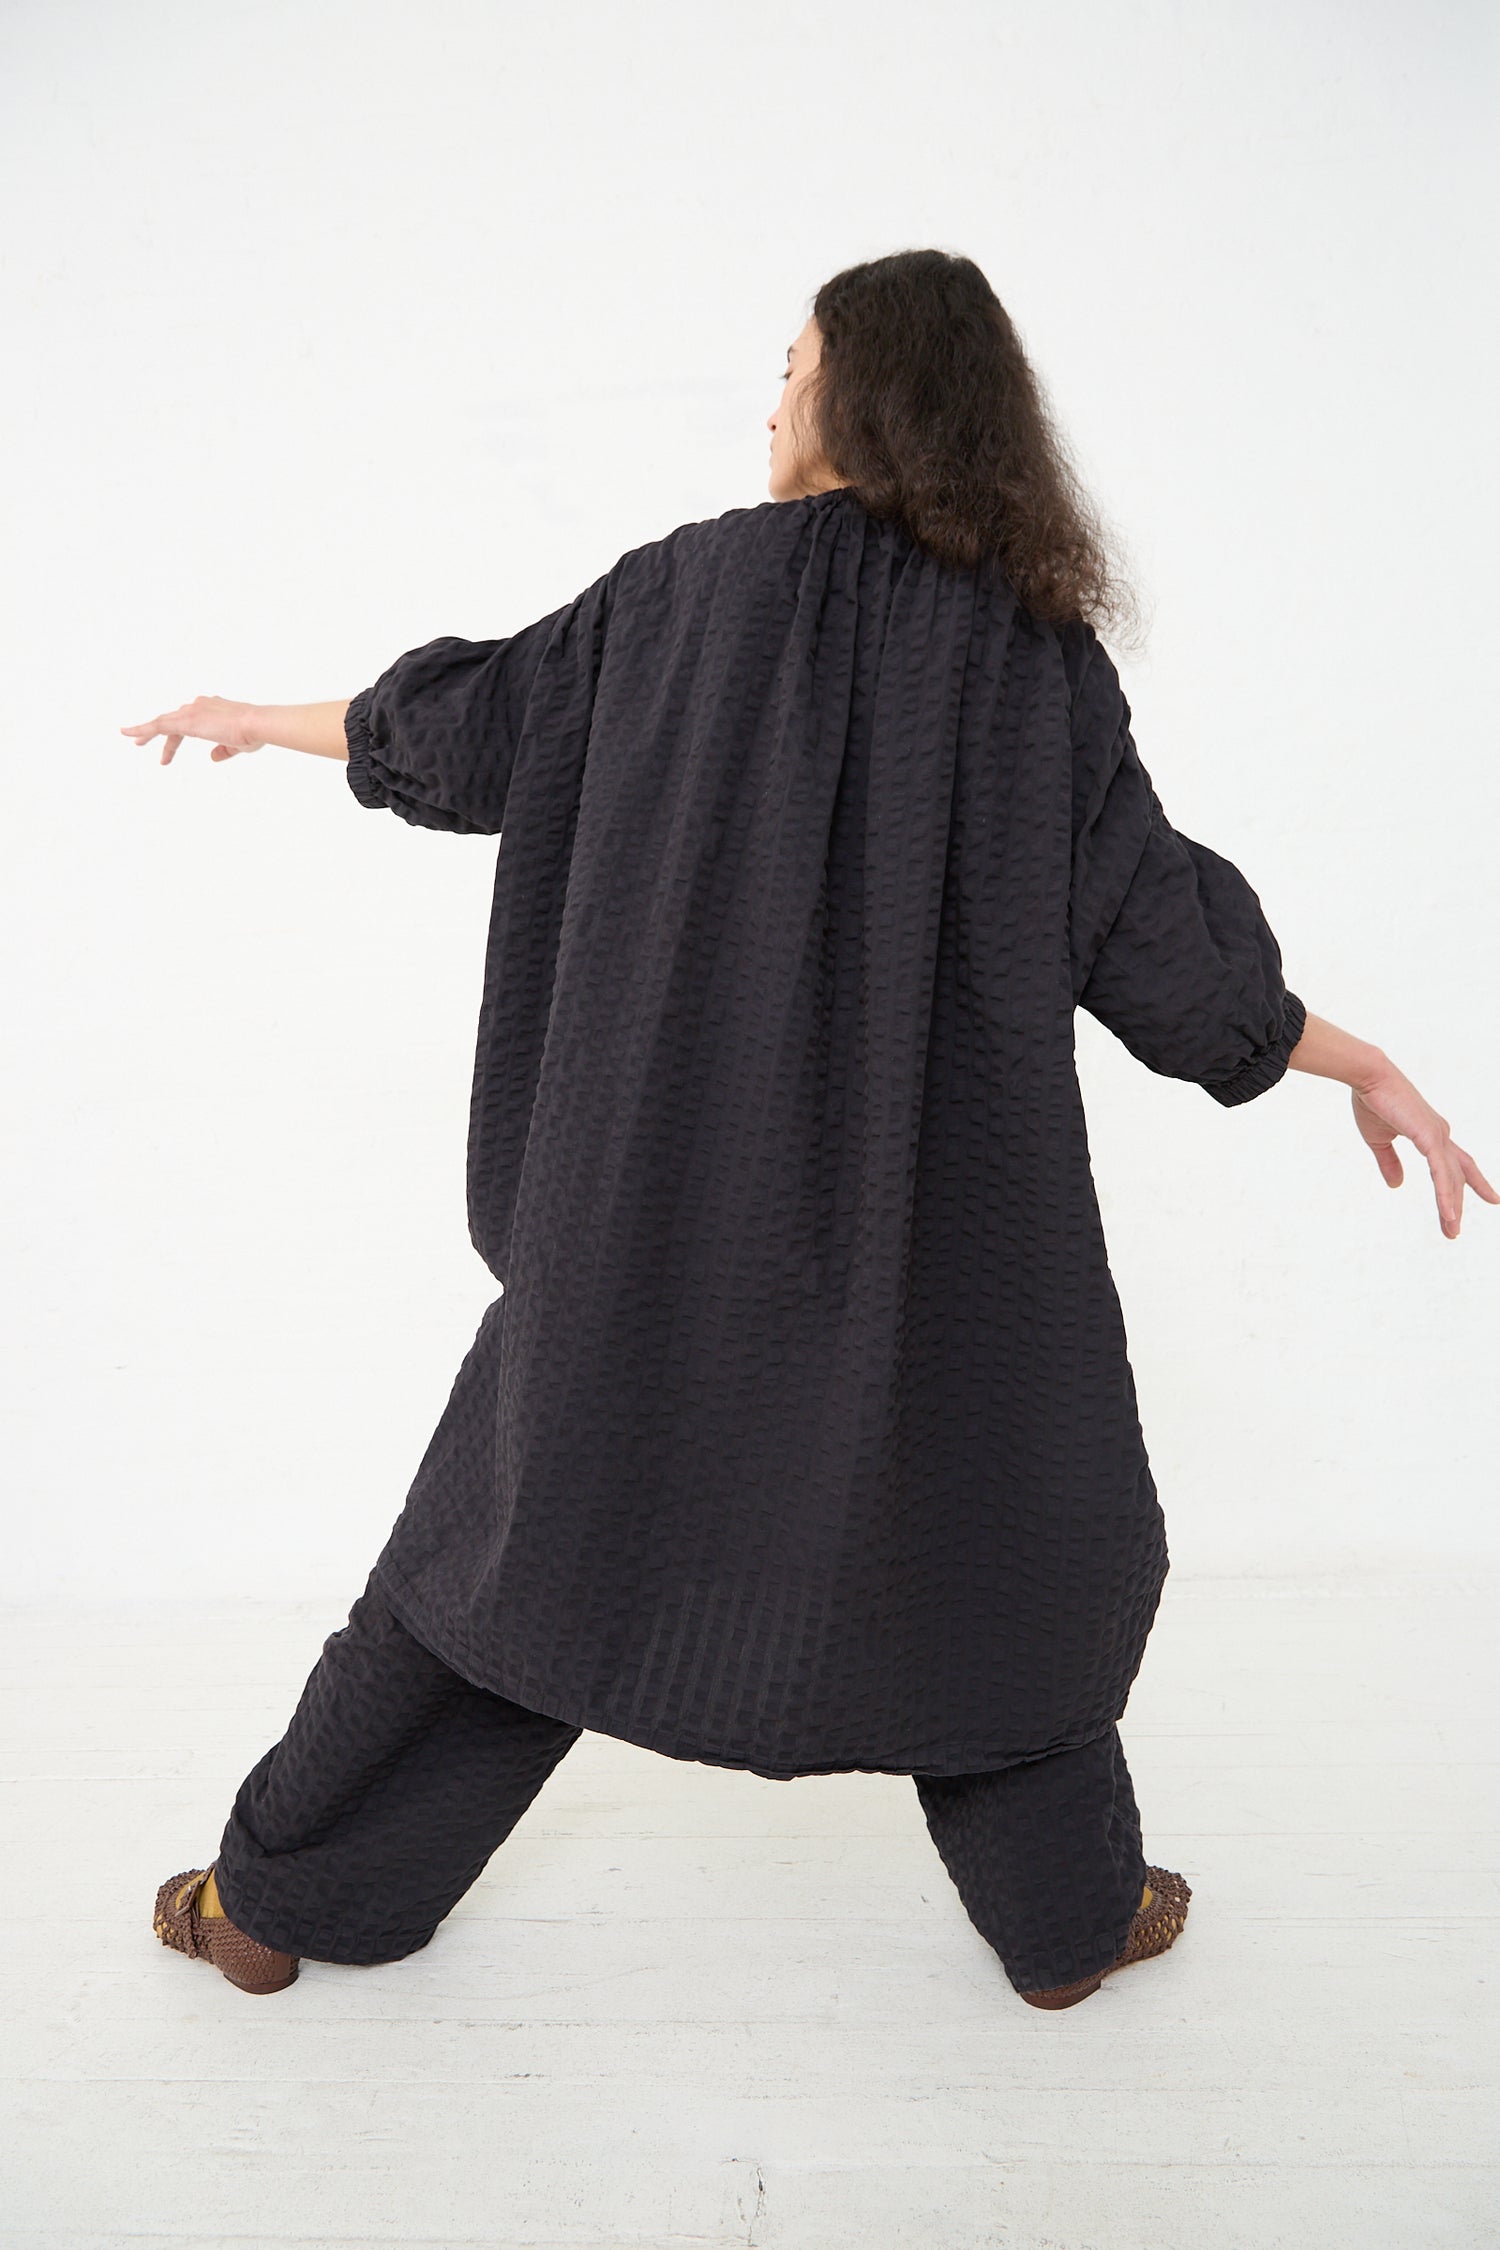 A person wearing a Black Crane Cotton Seersucker Sack Dress in Ink Black stands with their back to the camera, arms extended outward in a t-pose, and one leg stepping forward, against a plain white background.